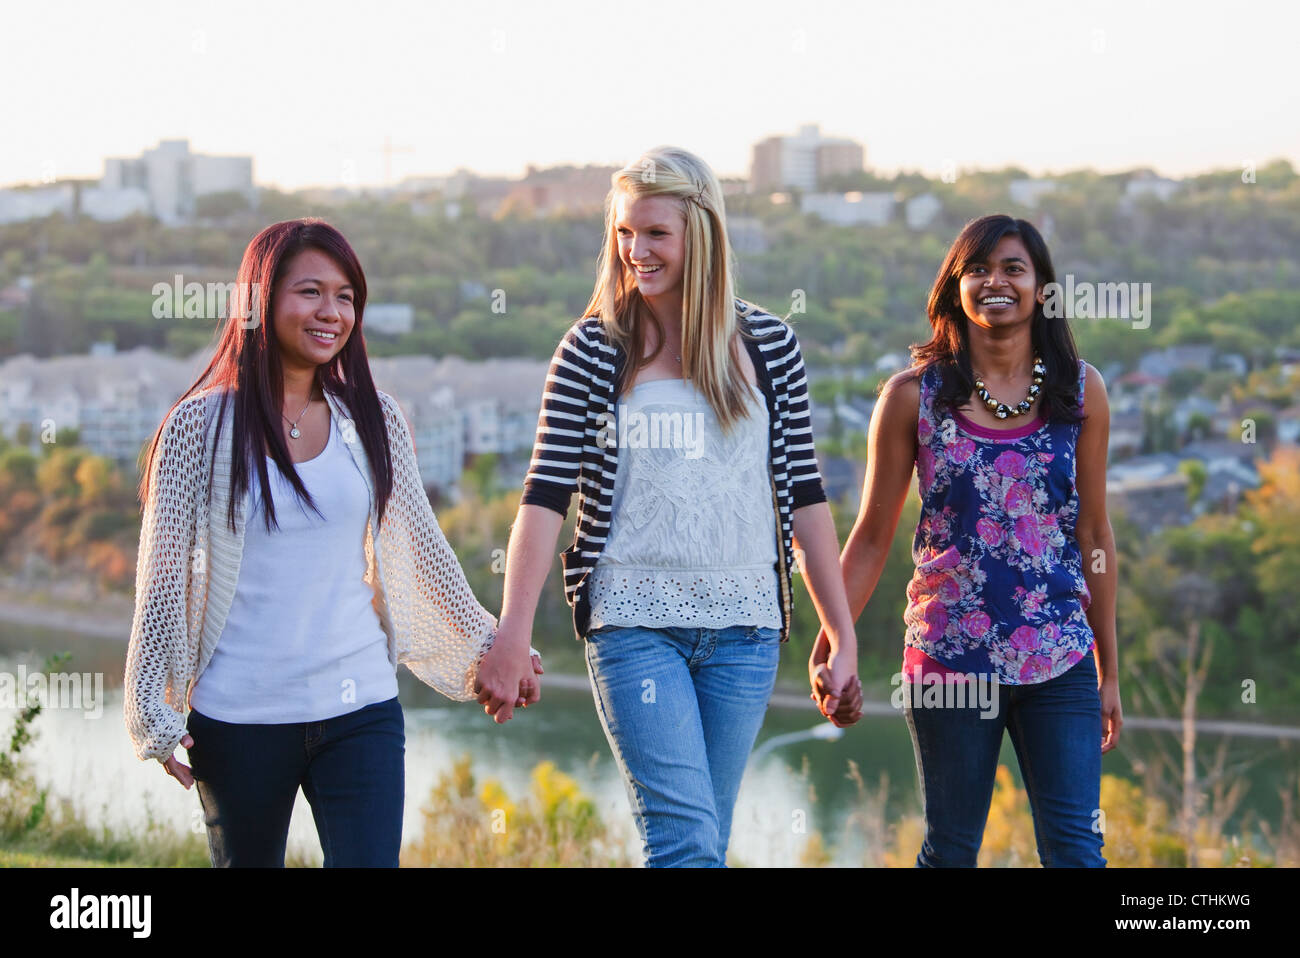 Friends Walking In A City Park With The City Skyline In The Background; Edmonton, Alberta, Canada Stock Photo